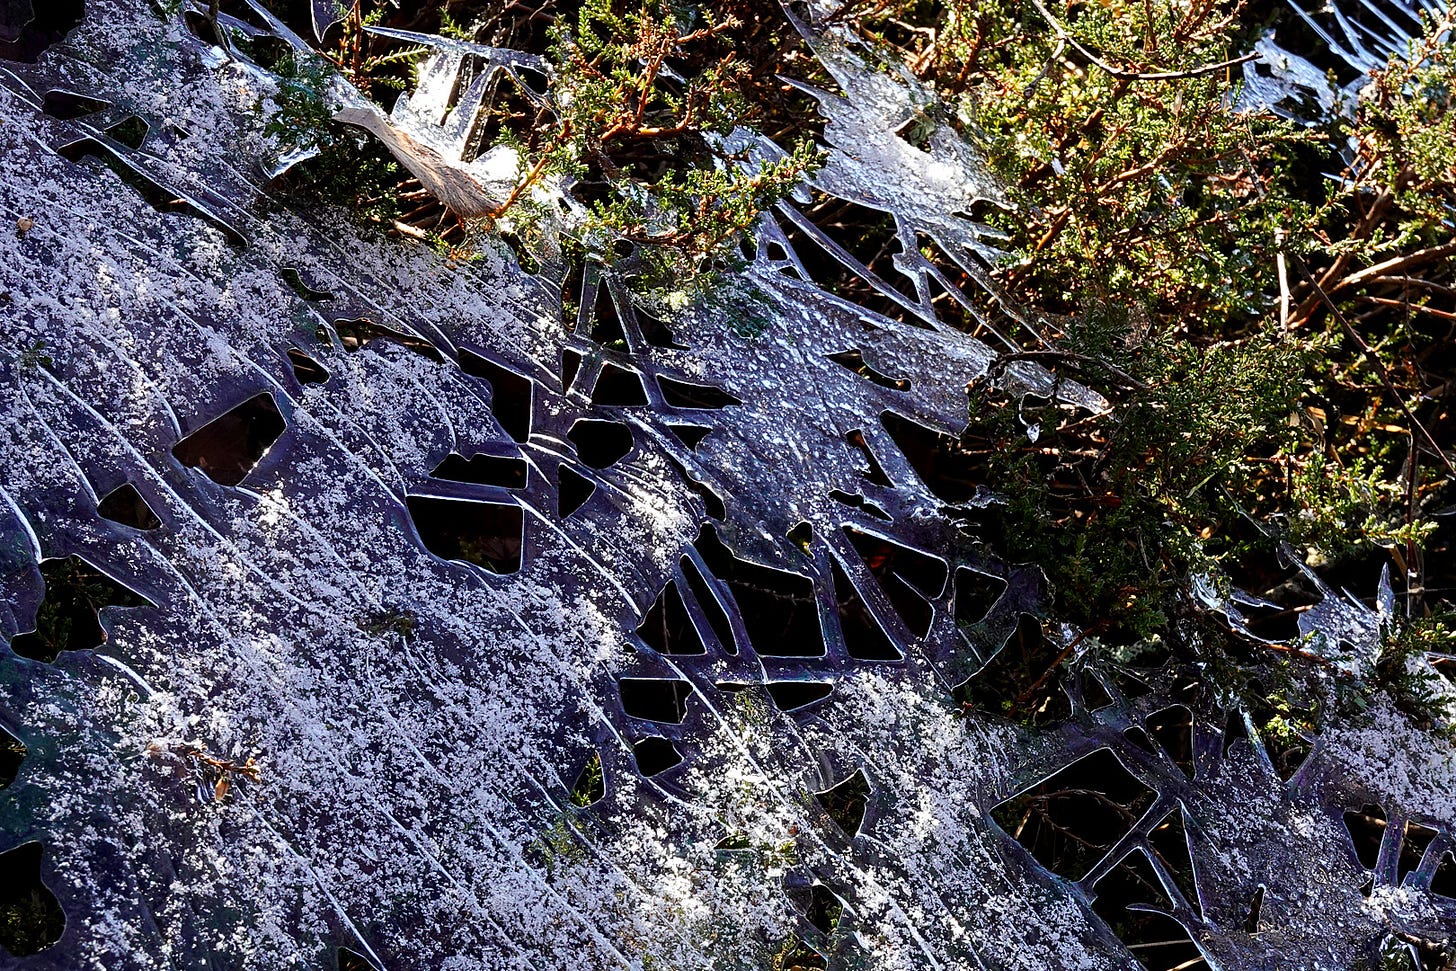 Paper thin ice suspended on heather, ice dusted with snow, lined and melting into abstract geometric shapes